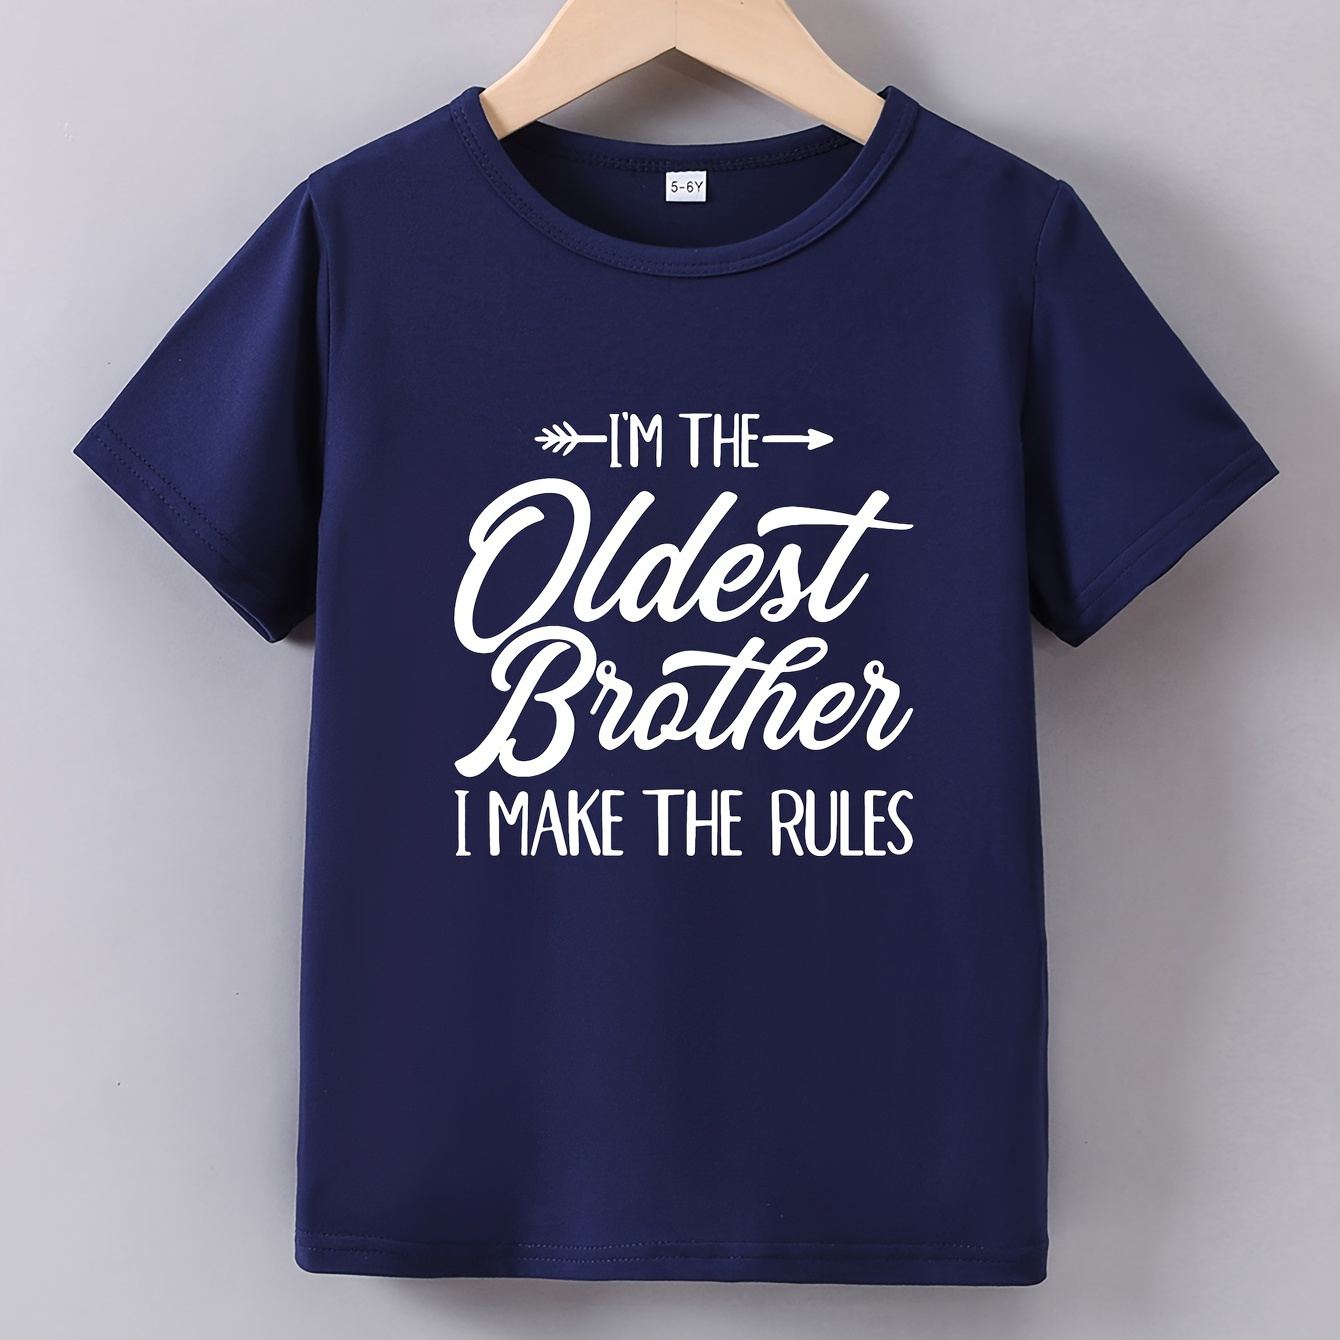 

Oldest Brother Print, Boys Creative T-shirt, Comfy Crew Neck Casual Tee Top, Trendy Summer Top